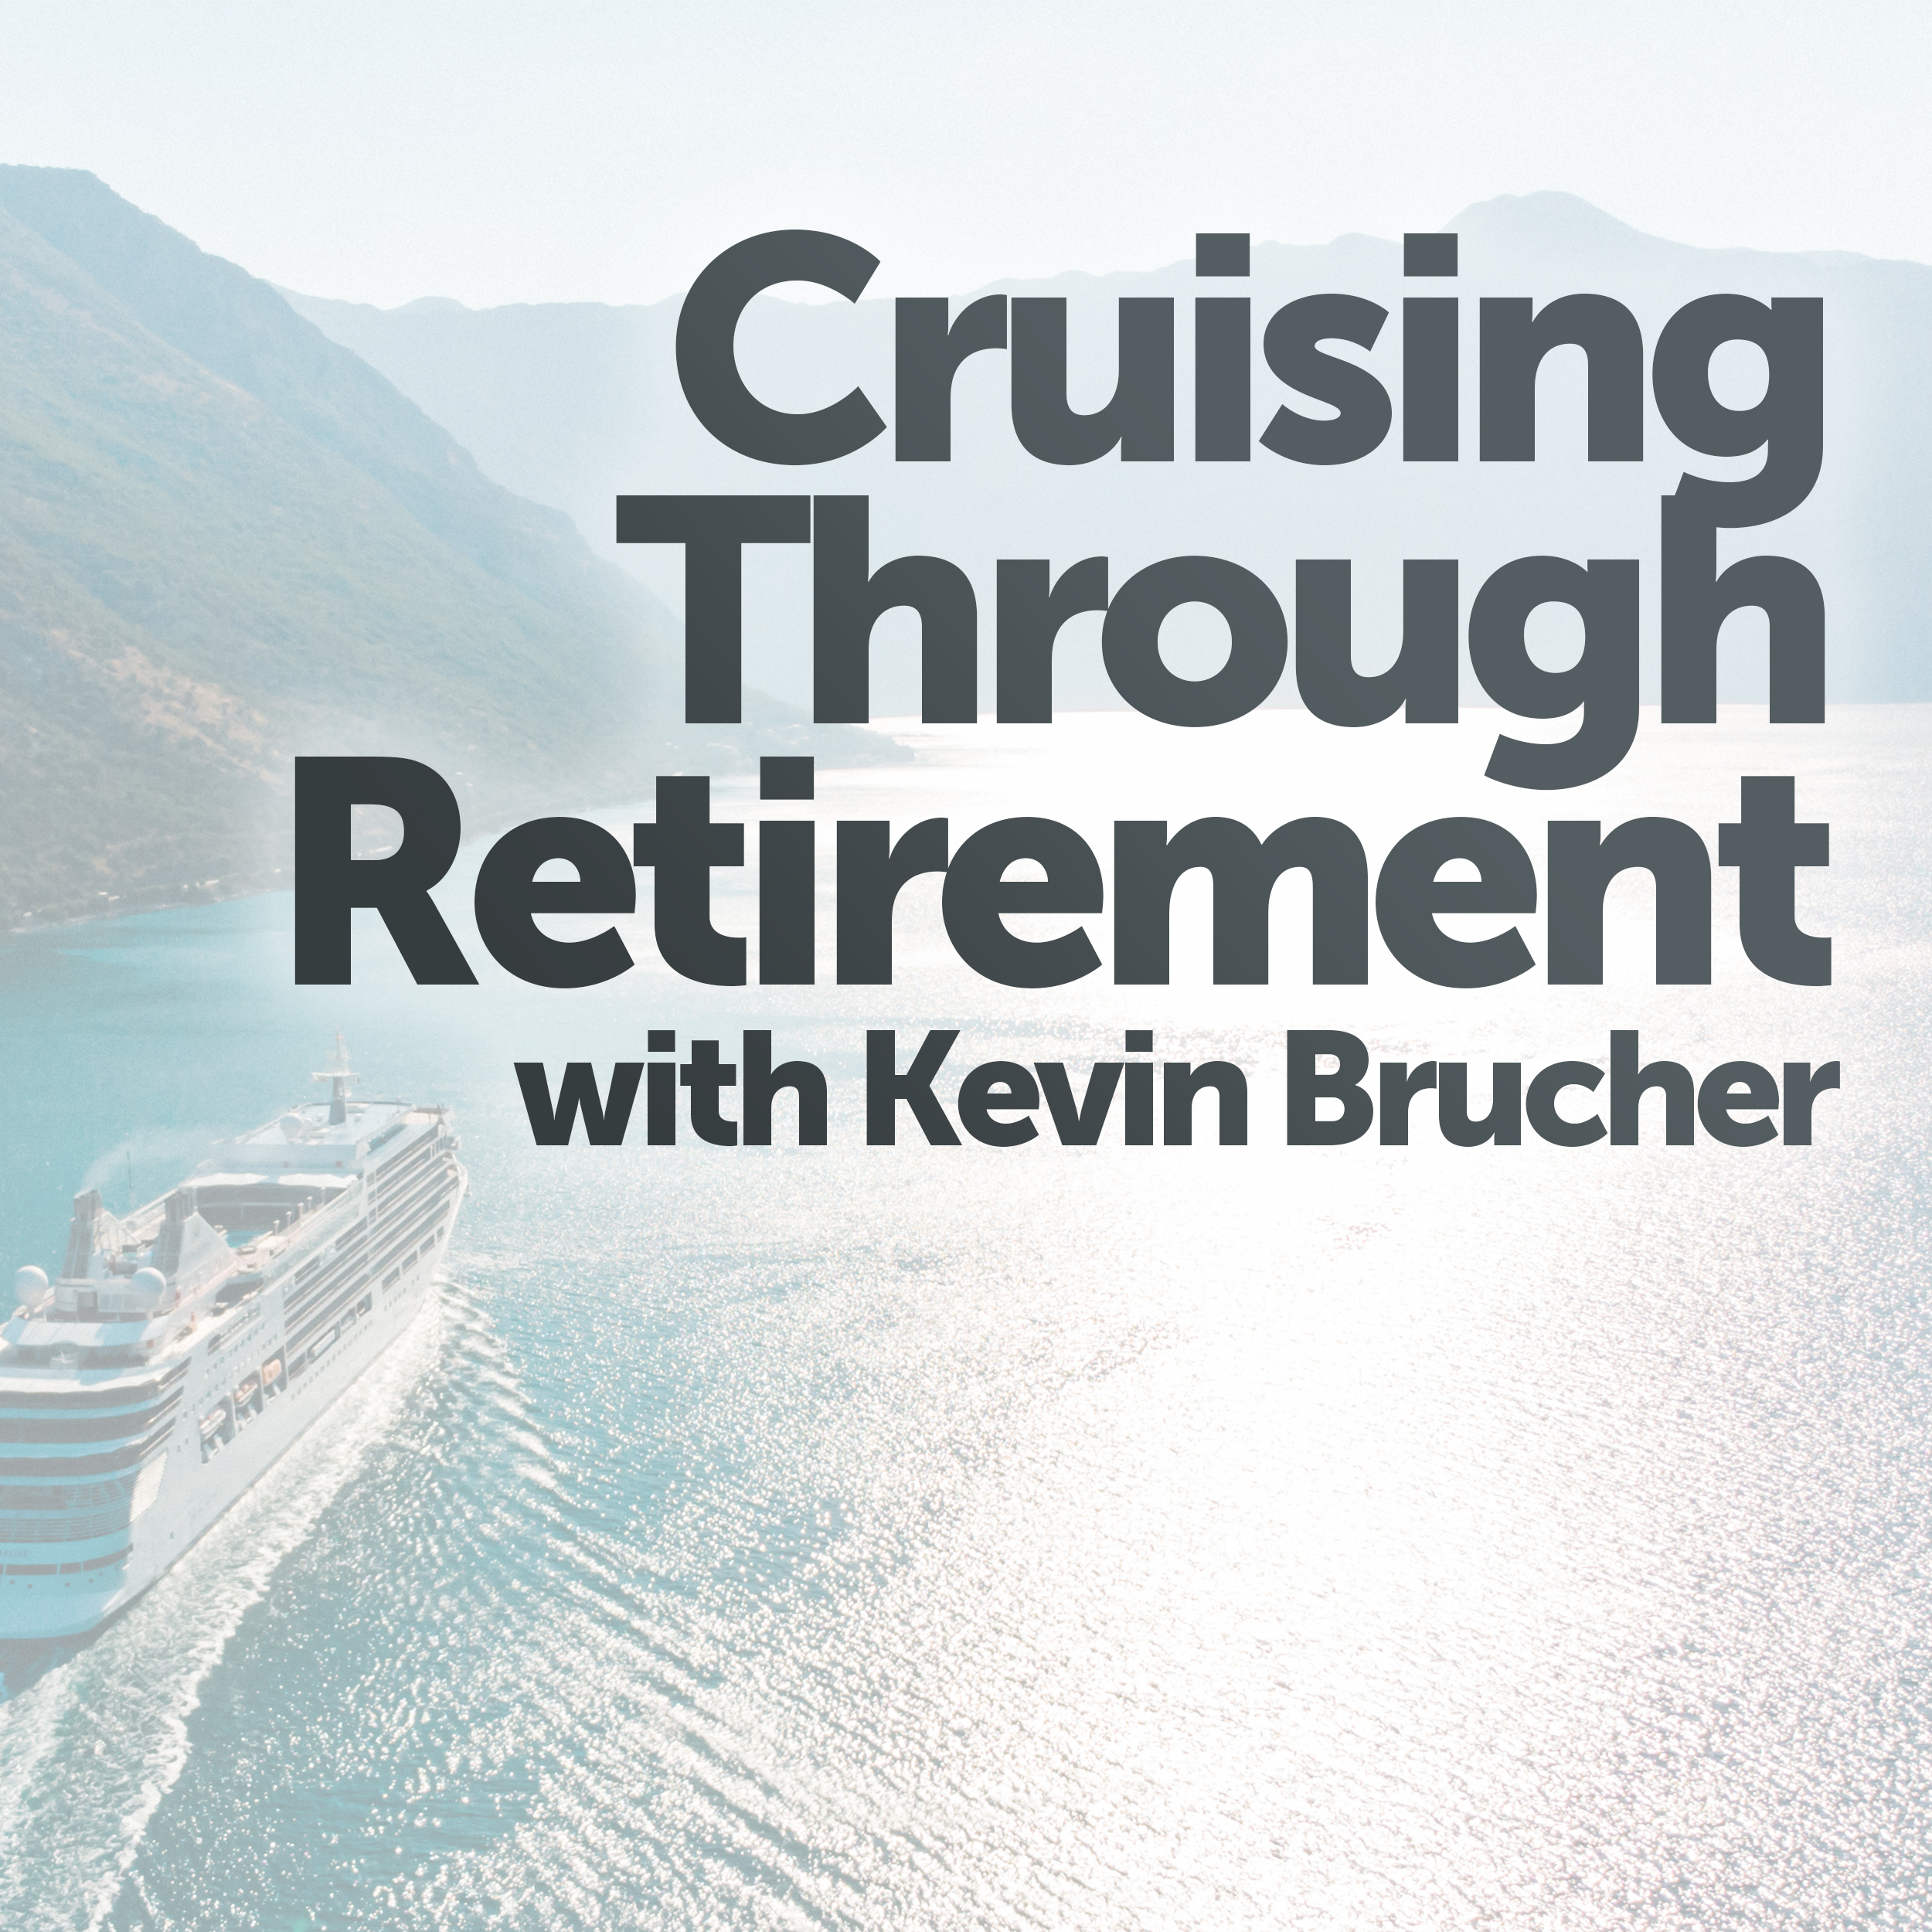 Cruising Through Retirement - It’s called retirement income replacement rate. On today’s show we’ll take a look at just what that is and how, with proper planning, you can achieve it in your retirement and income plan.